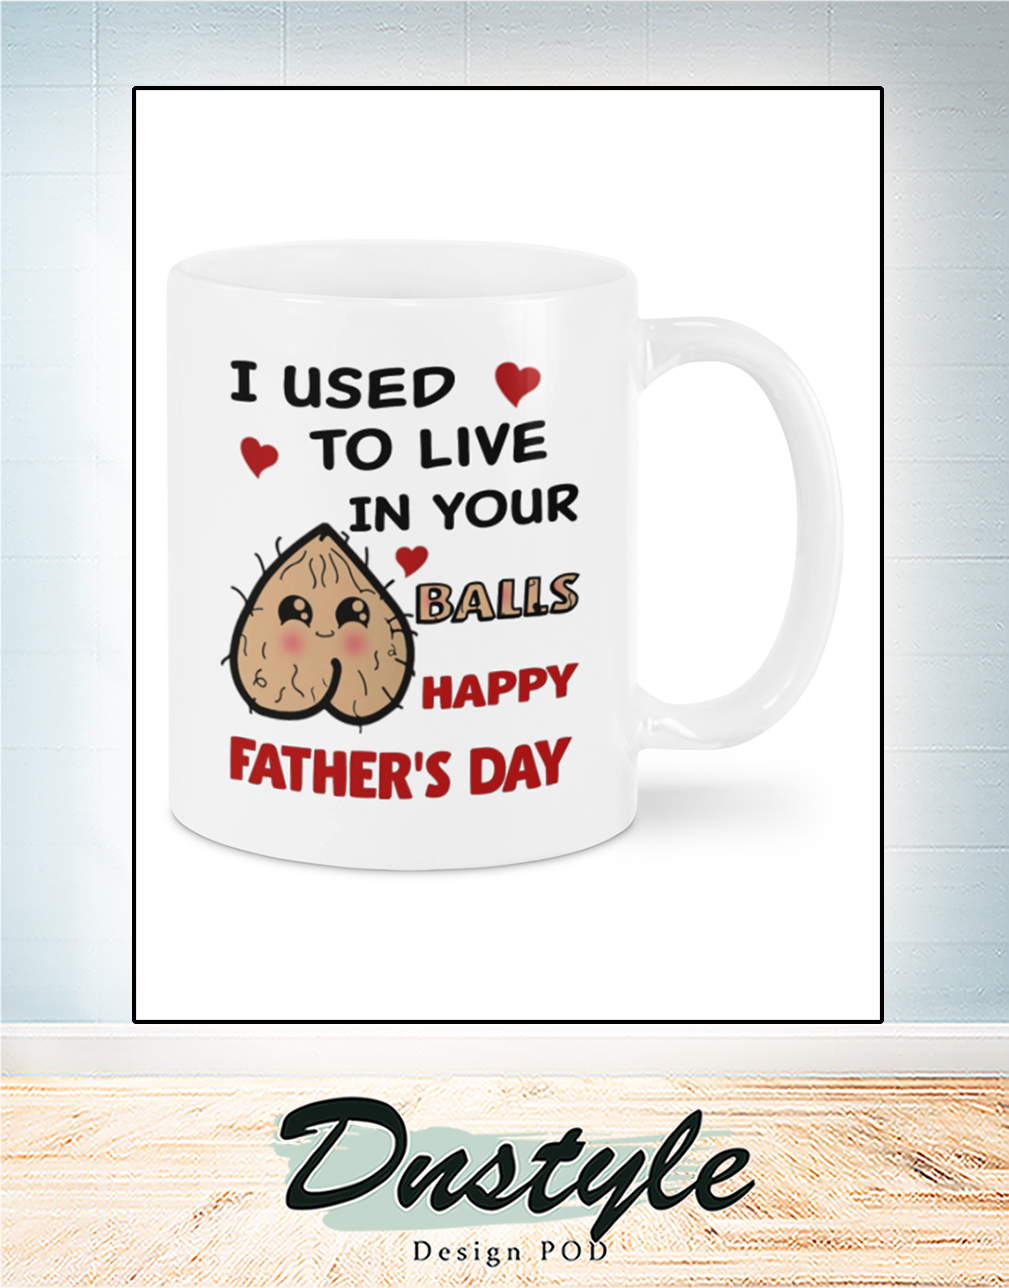 I used to live in your balls happy father's day mug